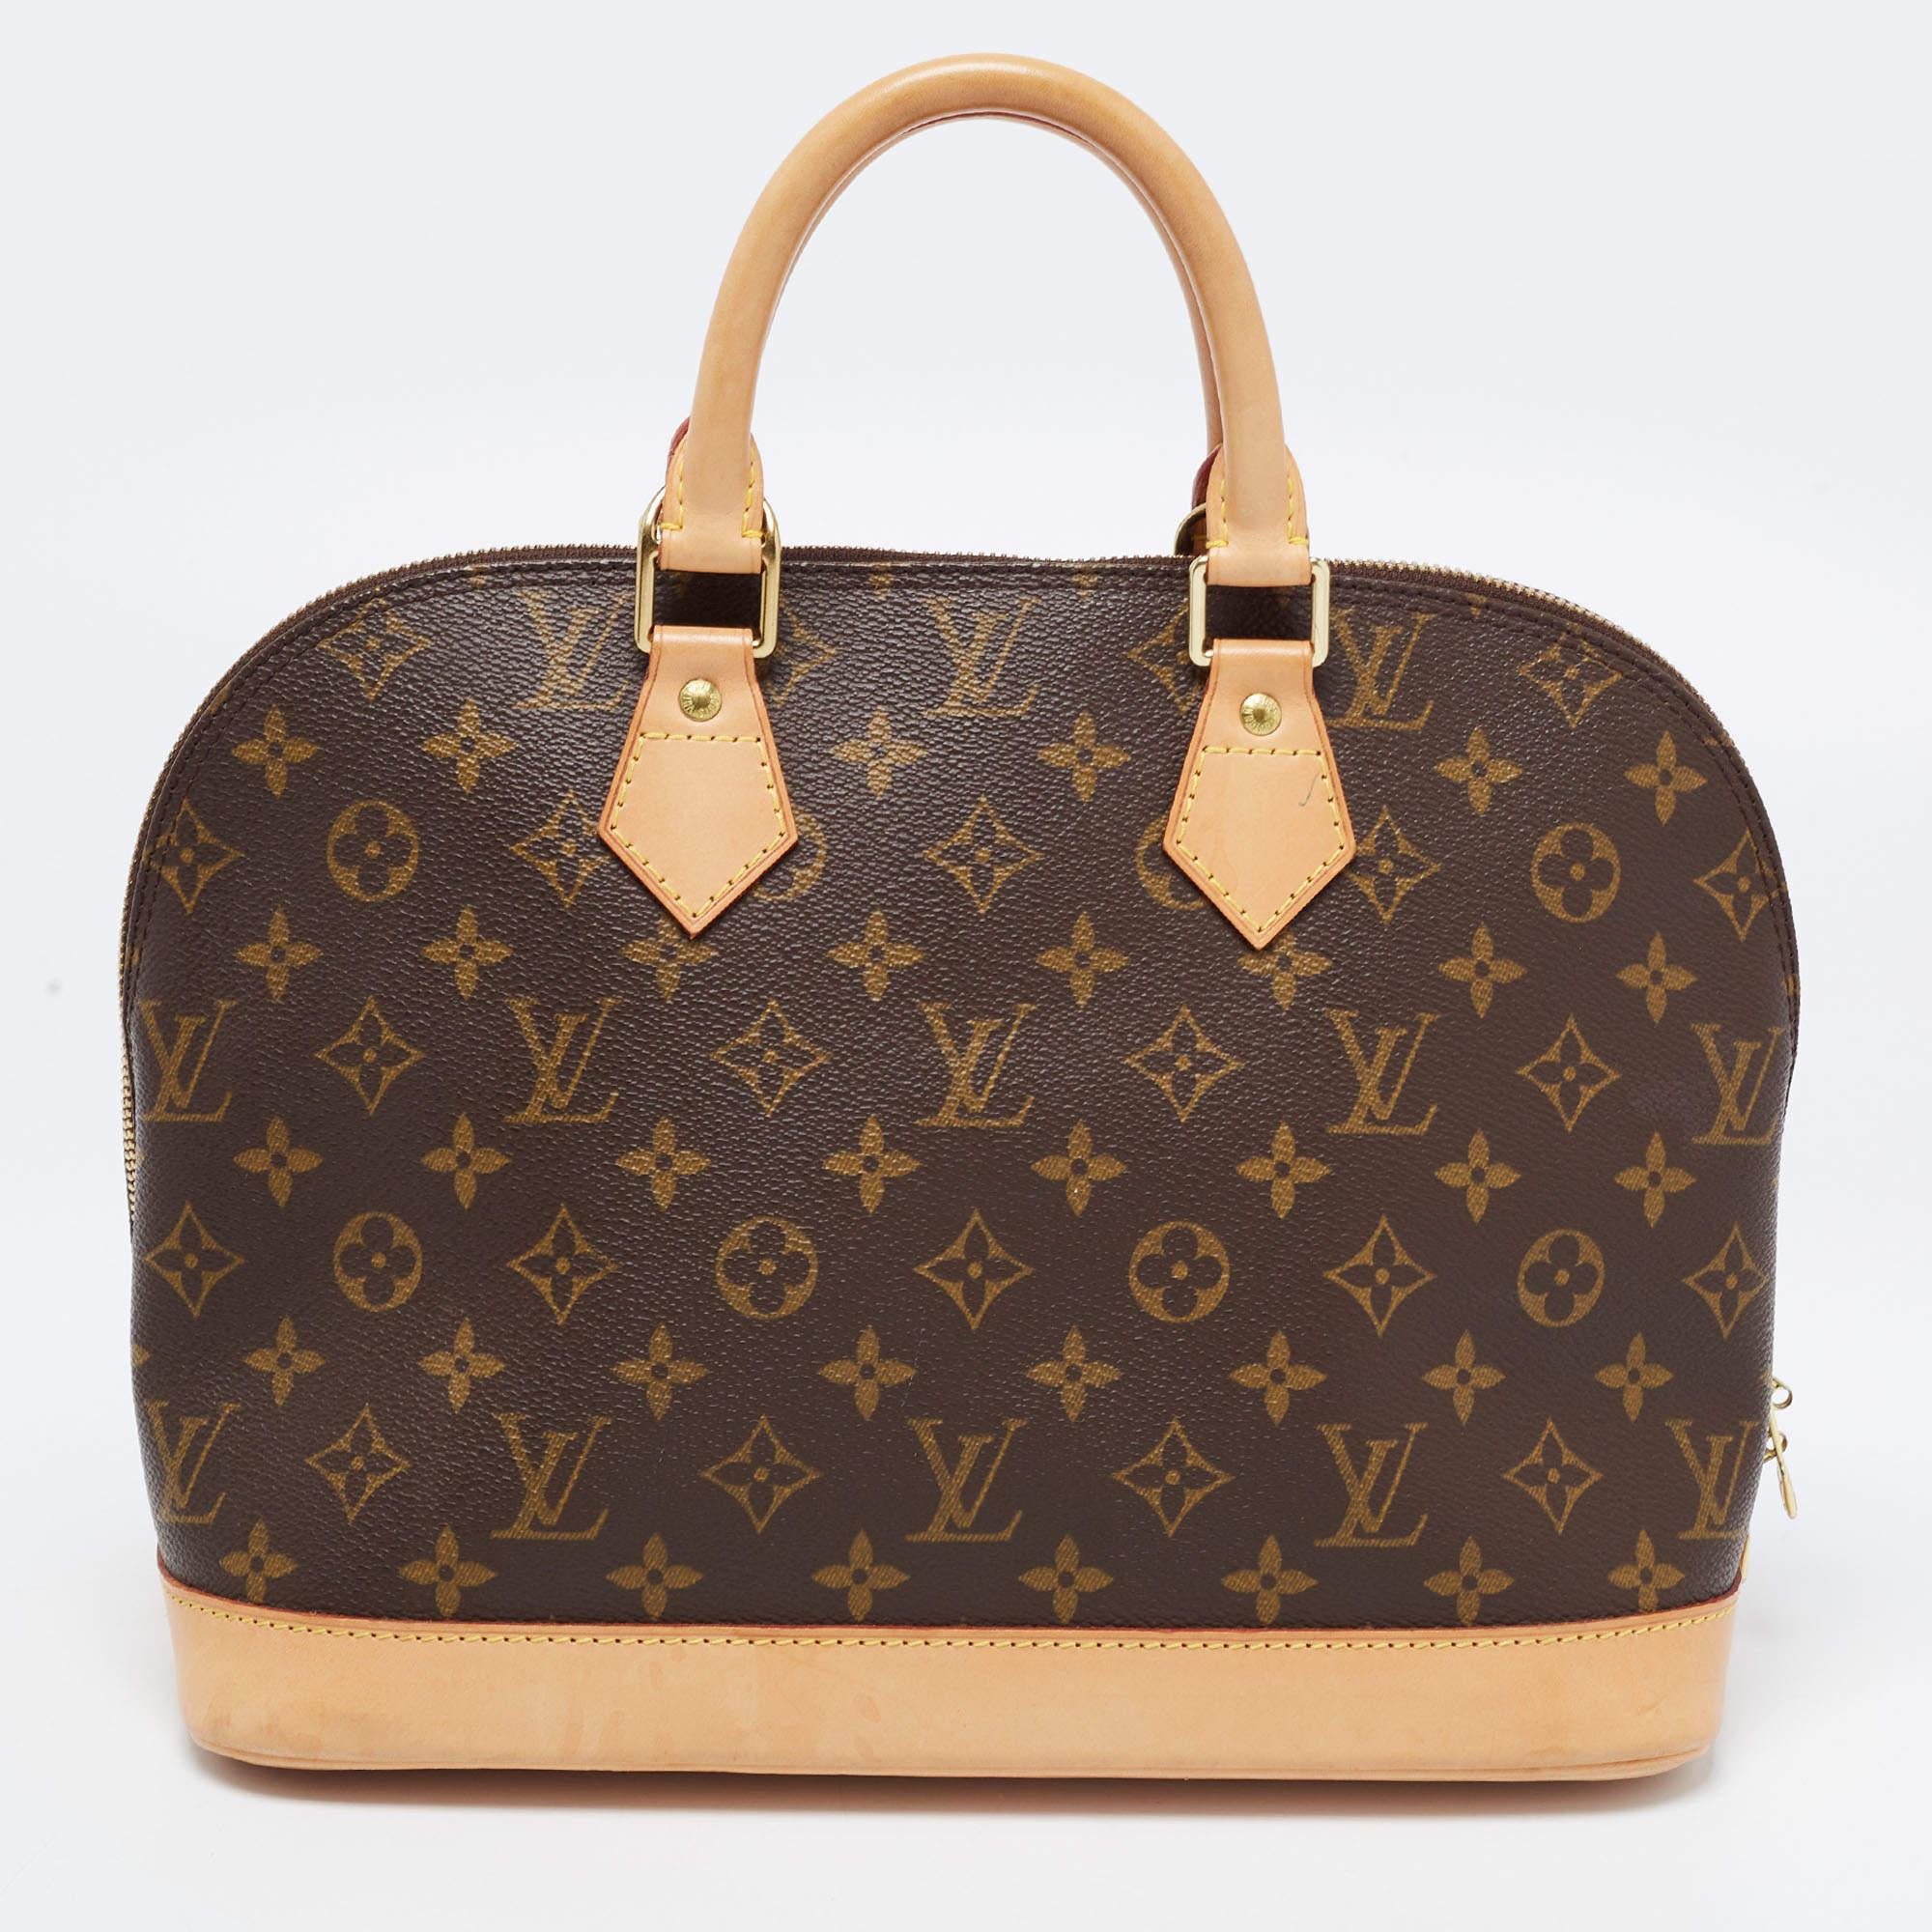 Thoughtful details, high quality, and everyday convenience mark this designer bag for women by Louis Vuitton. The bag is sewn with skill to deliver a refined look and an impeccable finish.

Includes: Padlock(no keys)